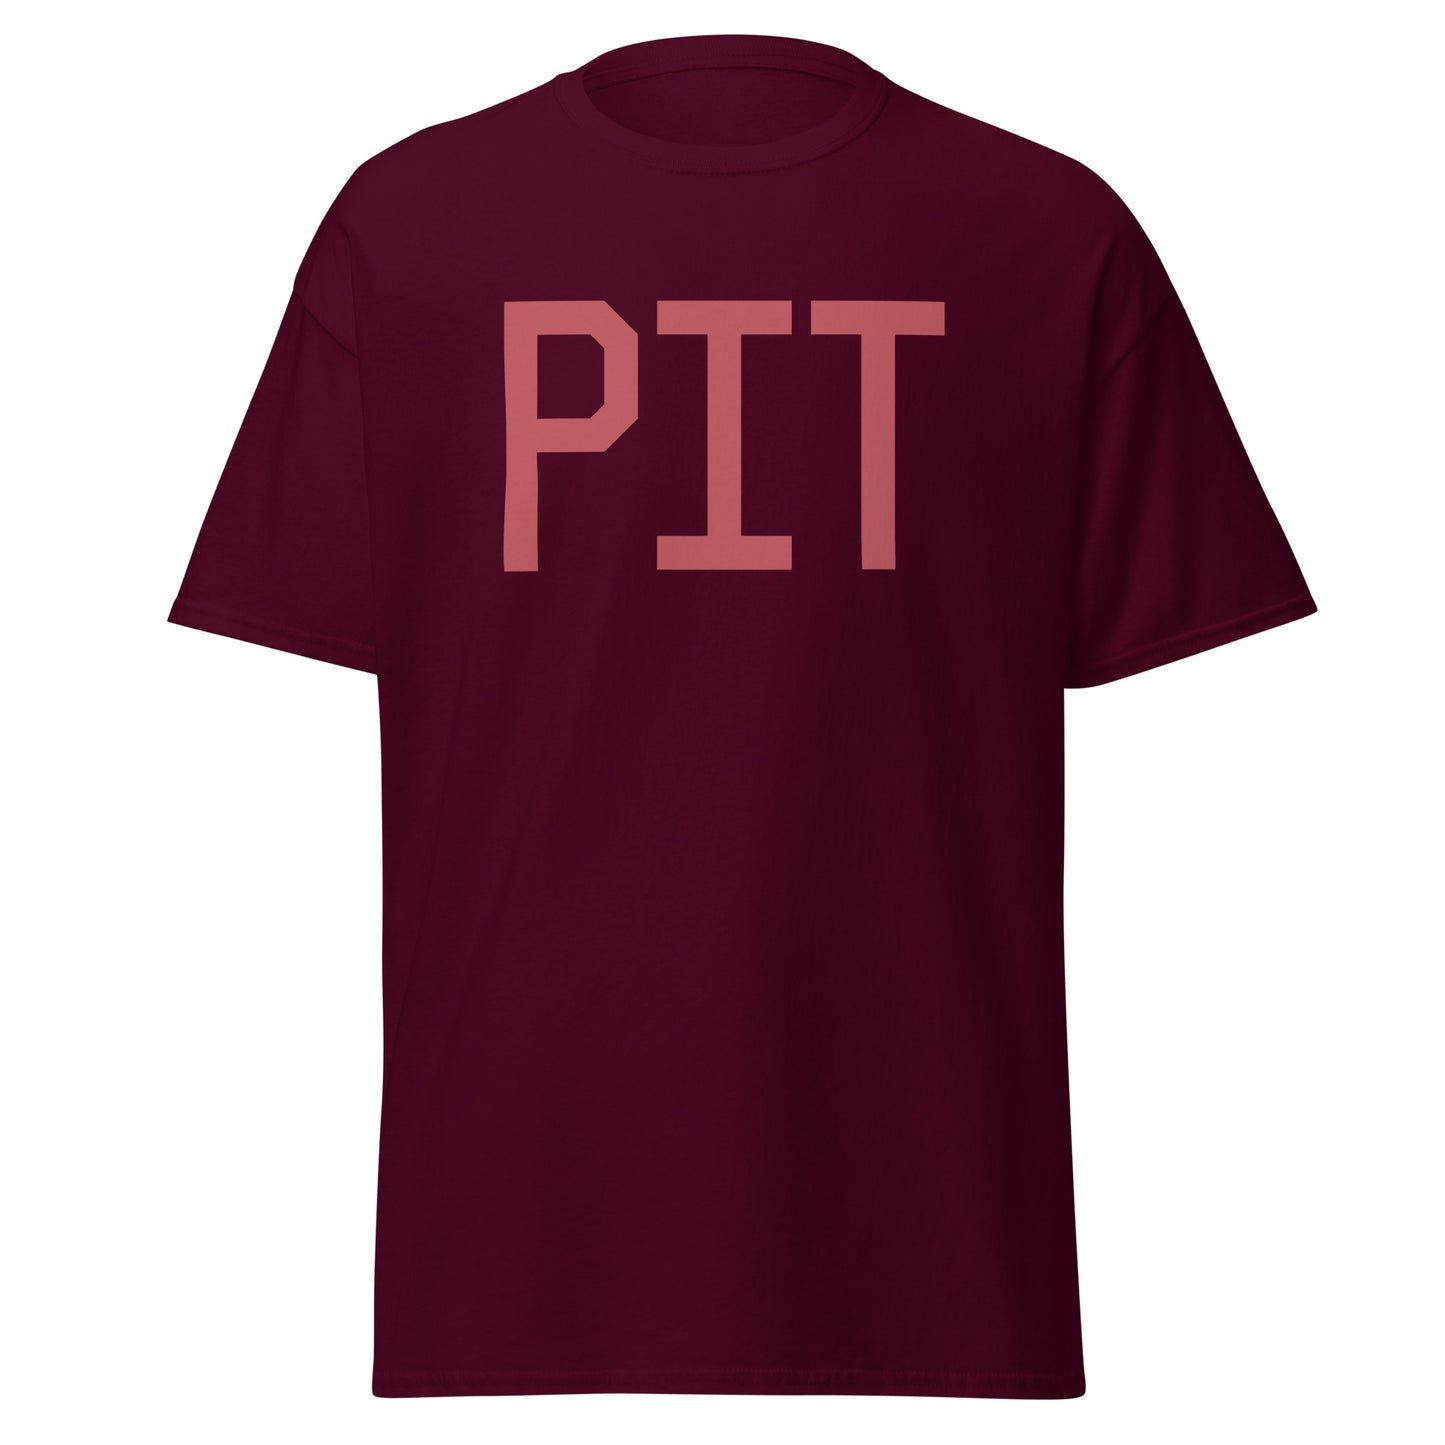 Aviation Enthusiast Men's Tee - Deep Pink Graphic • PIT Pittsburgh • YHM Designs - Image 05